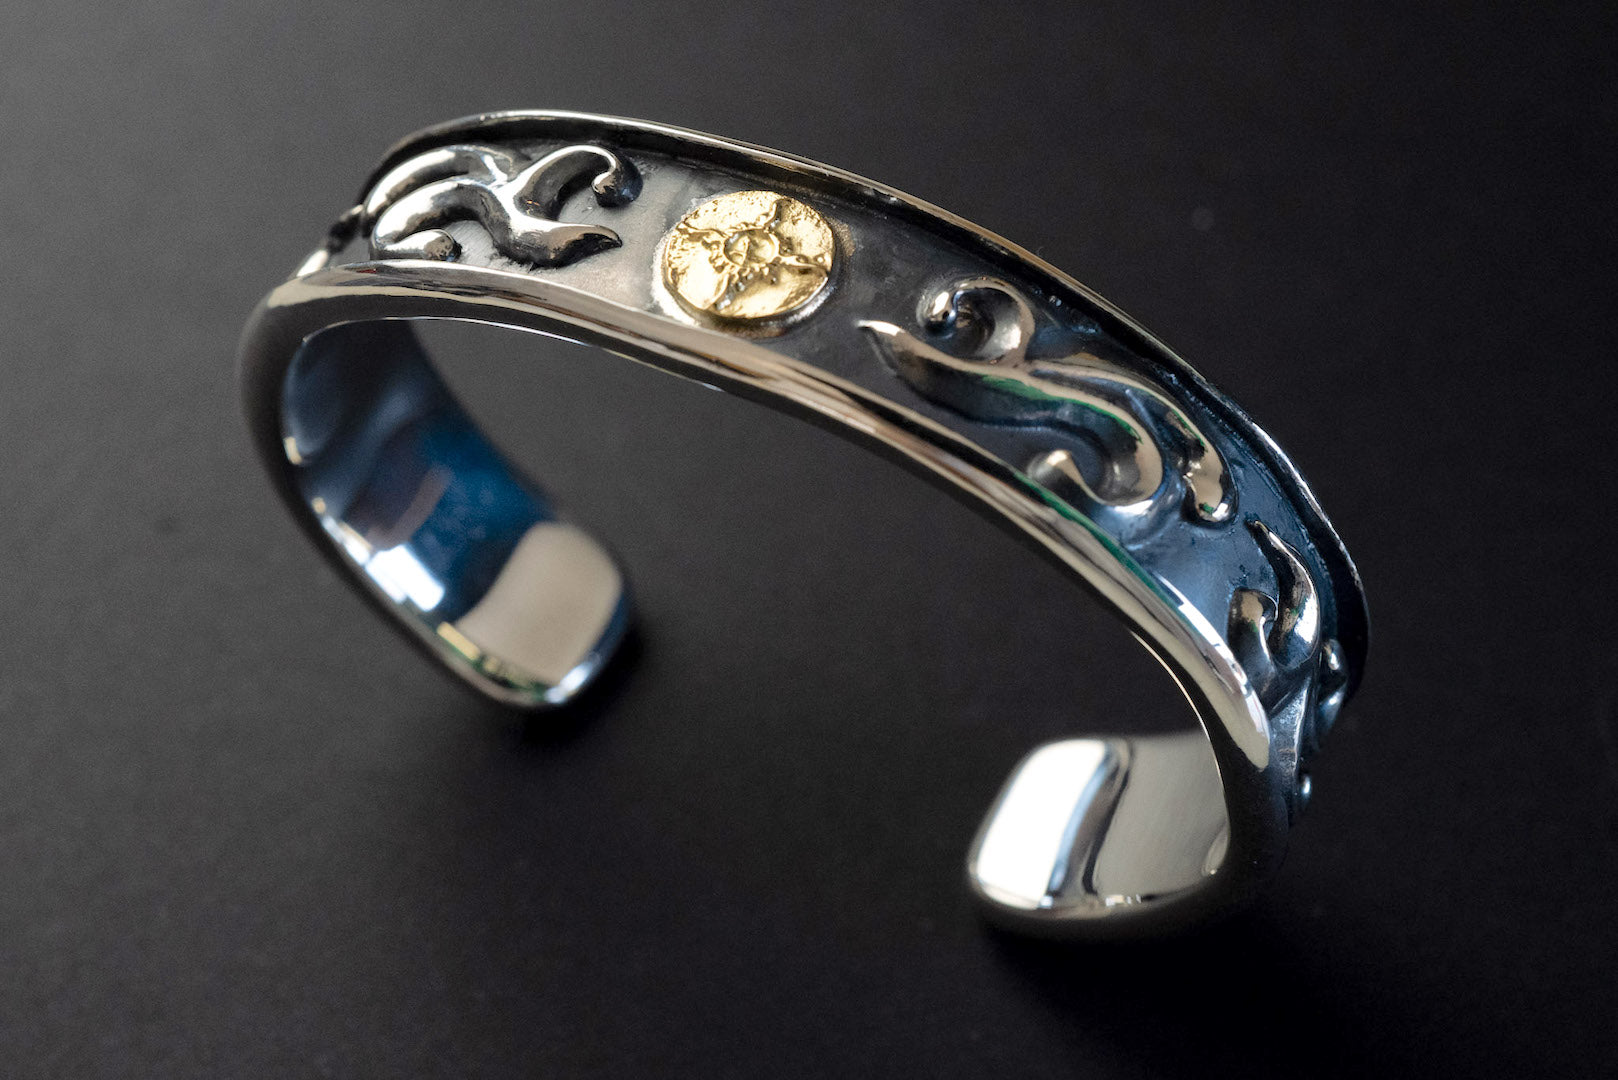 First Arrow's Raised Arabesque Silver Bangle with 18K Gold Emblem (BR-028)